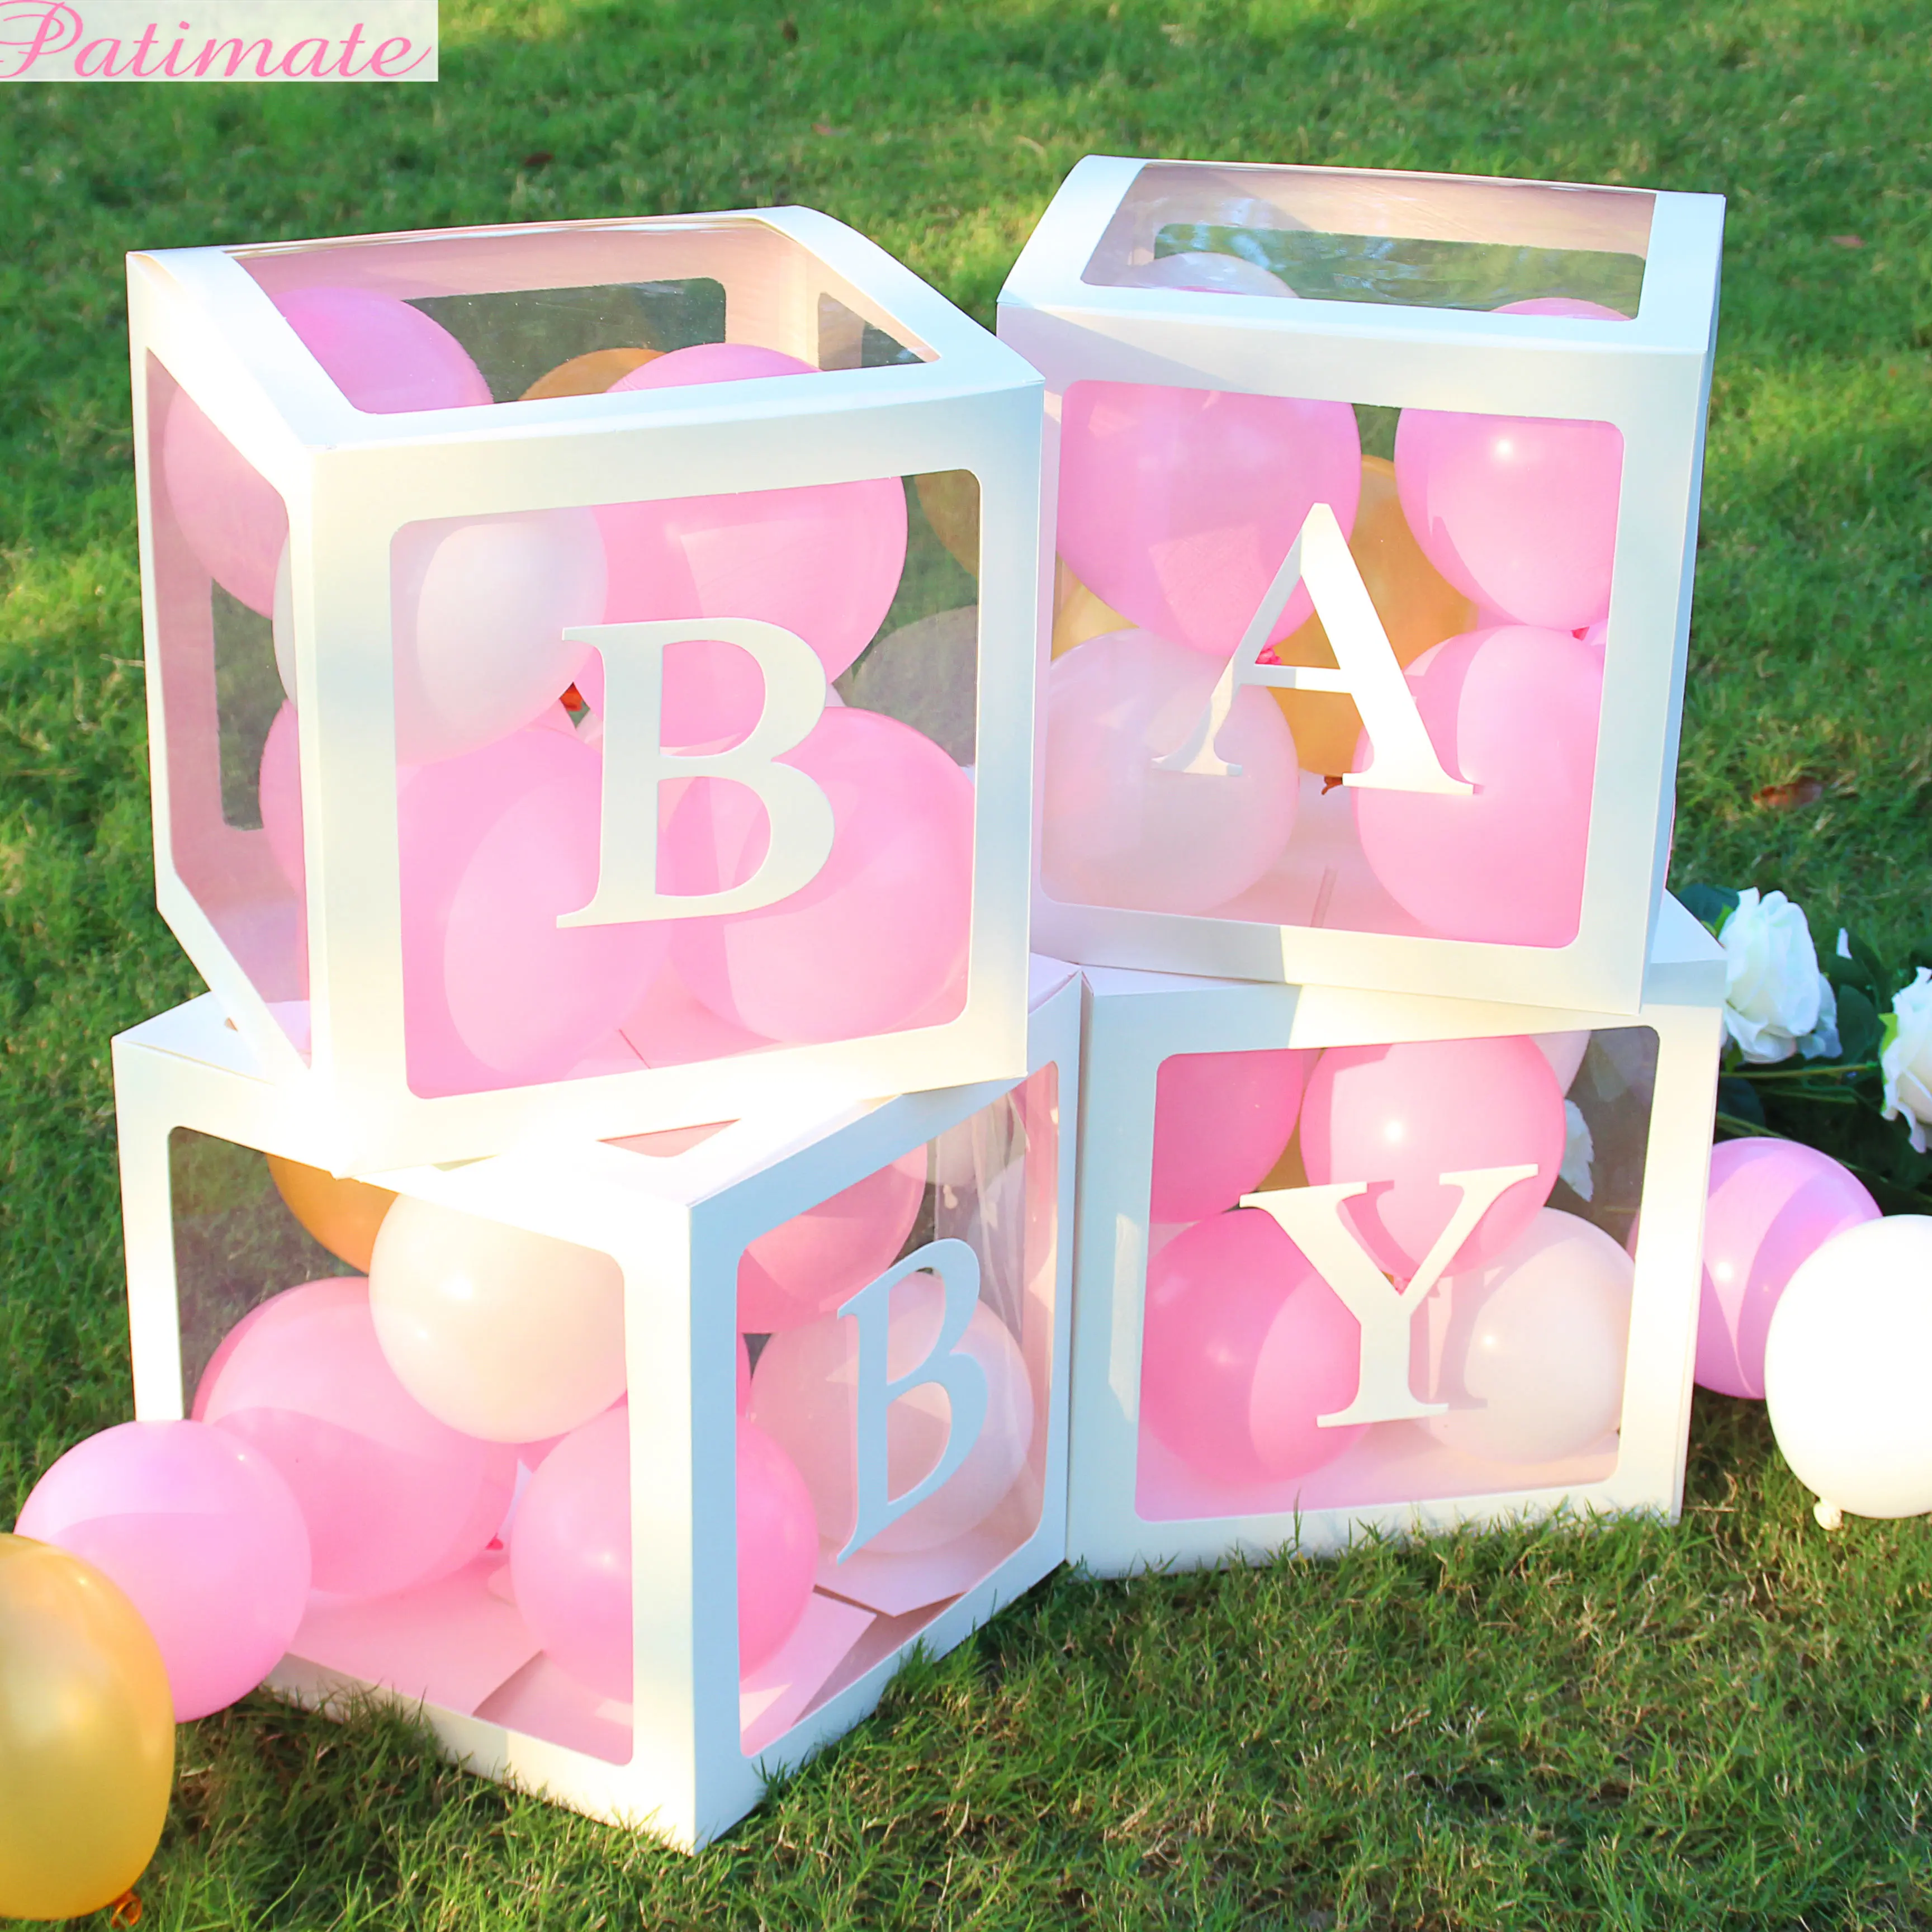 Patimete Alphabet Transparent Box Gift Boy Girl Baby Shower Decorations Christening Birthday Party Decor Babyshower Party Favors Buy At The Price Of 5 05 In Aliexpress Com Imall Com,How To Schedule A Task In Windows Server